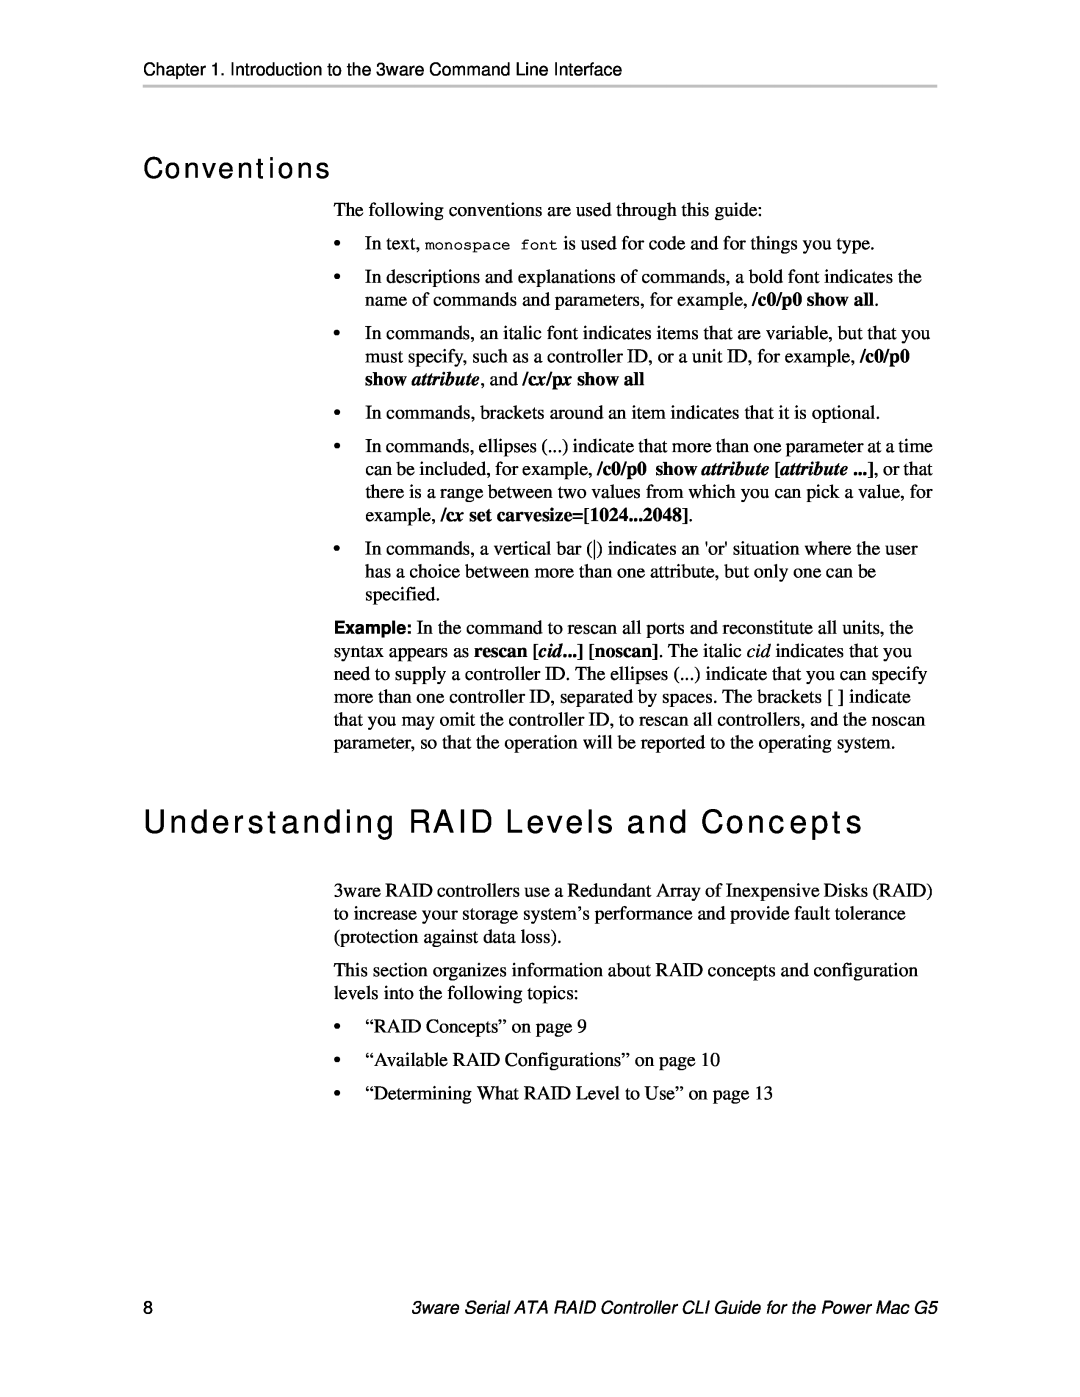 AMCC 9590SE-4ME manual Understanding RAID Levels and Concepts, Conventions 